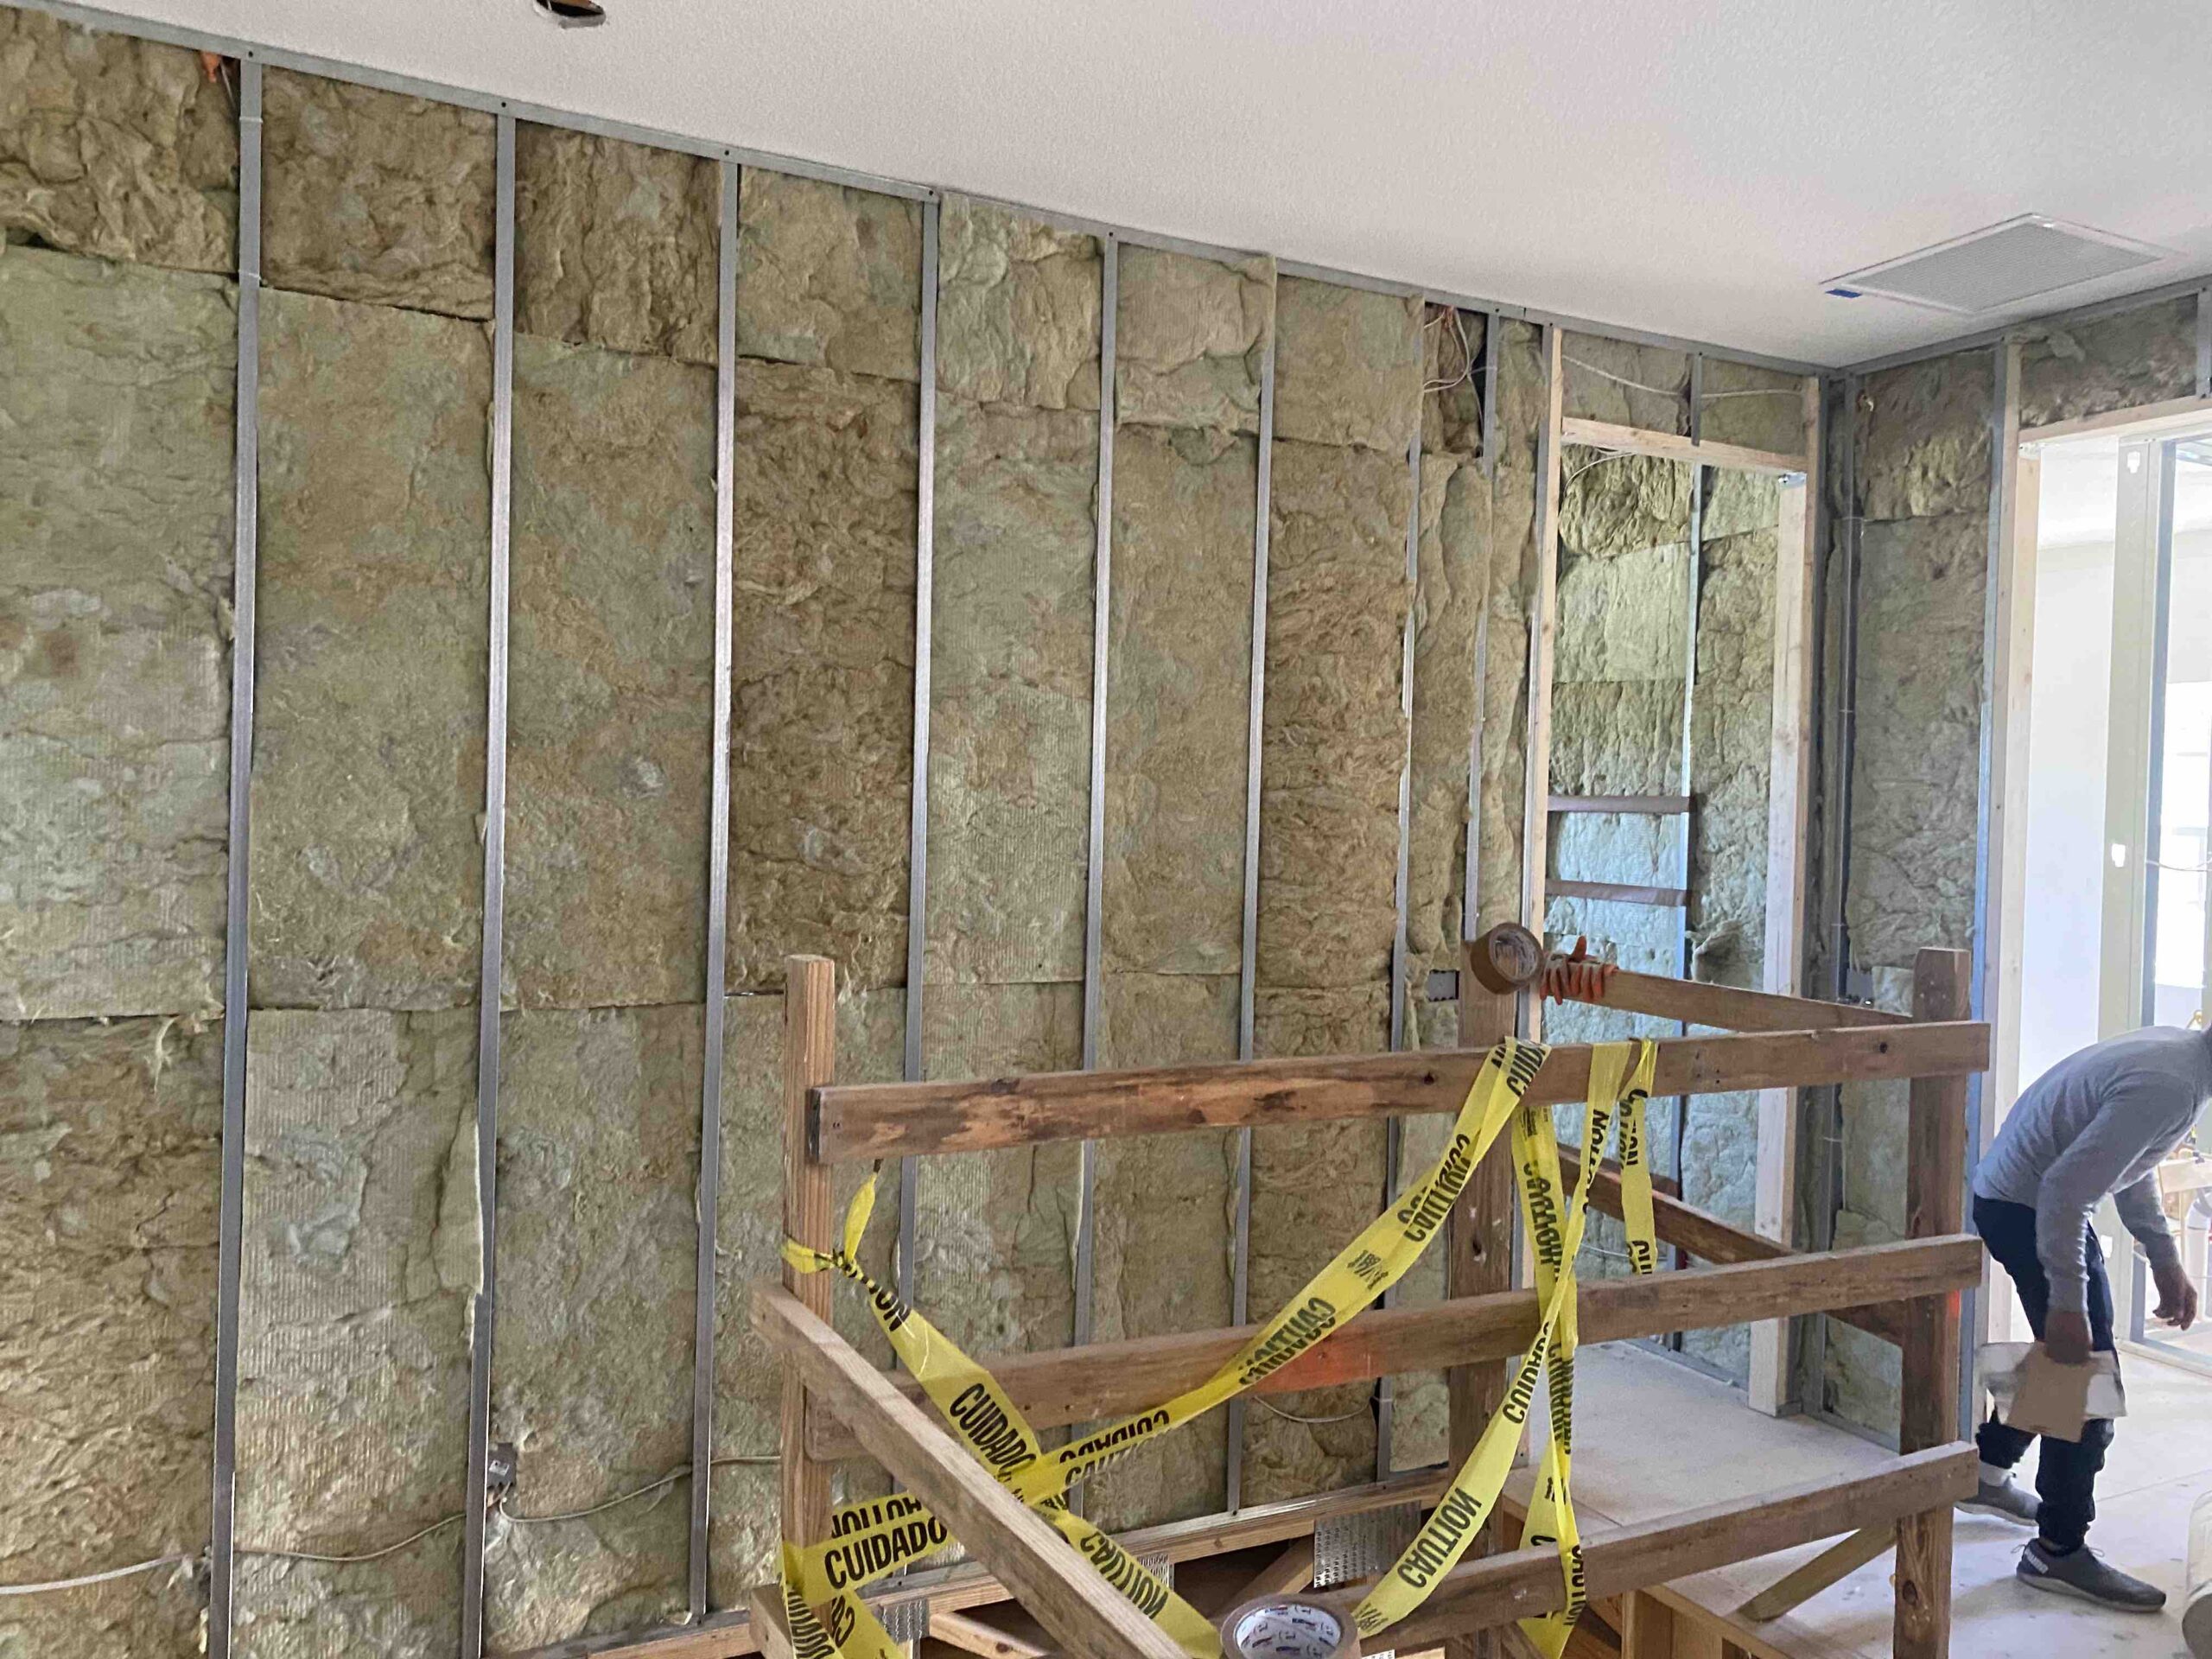 Rockwool or Mineral Wool can being installed for sound in interior walls and around the door. Works great when people play music loud.